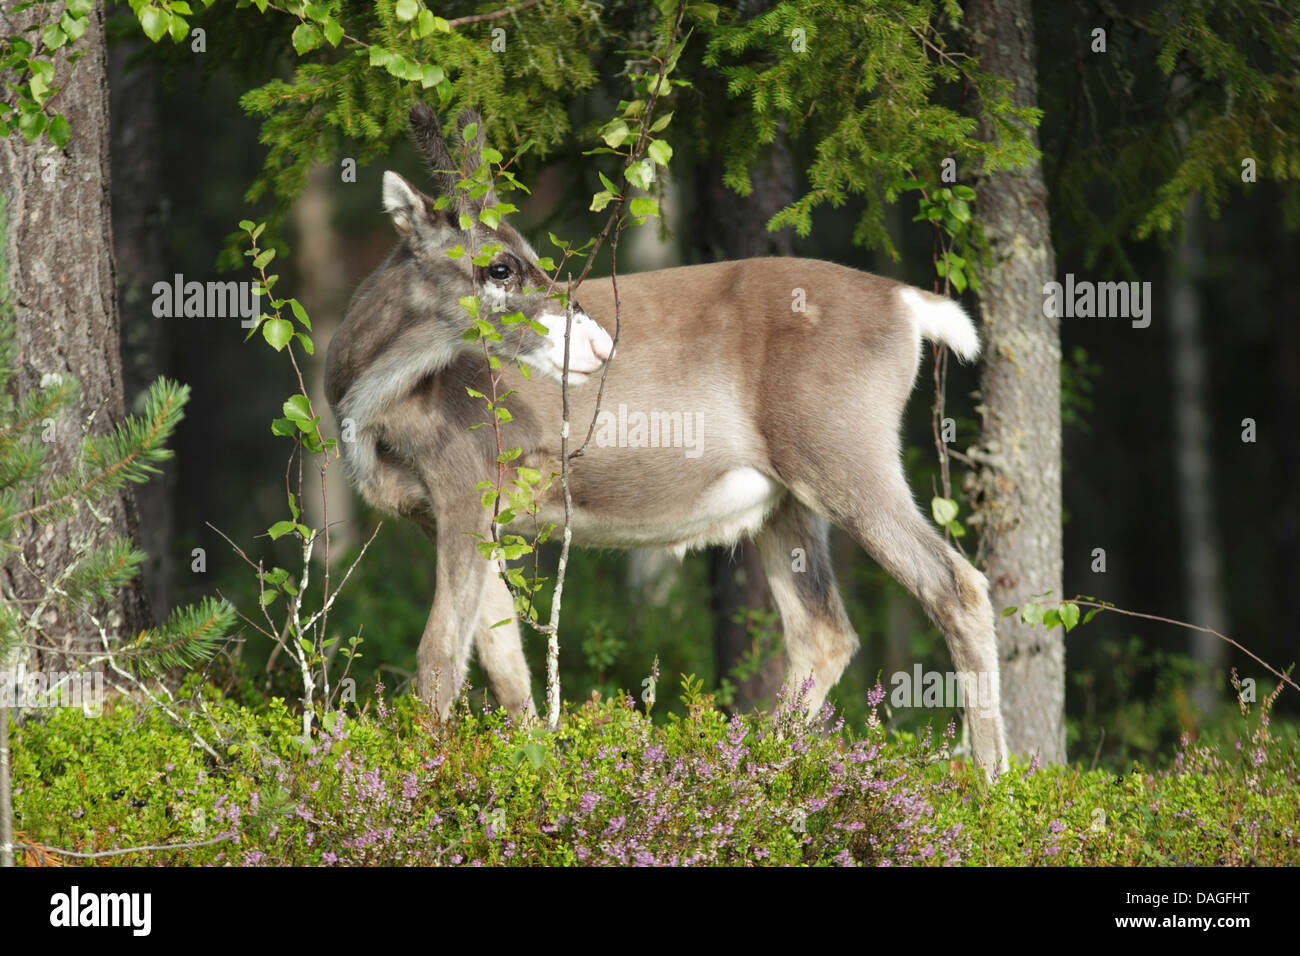 Young reindeer (Rangifer tarandus) standing among vegetation at the edge of a forest Stock Photo